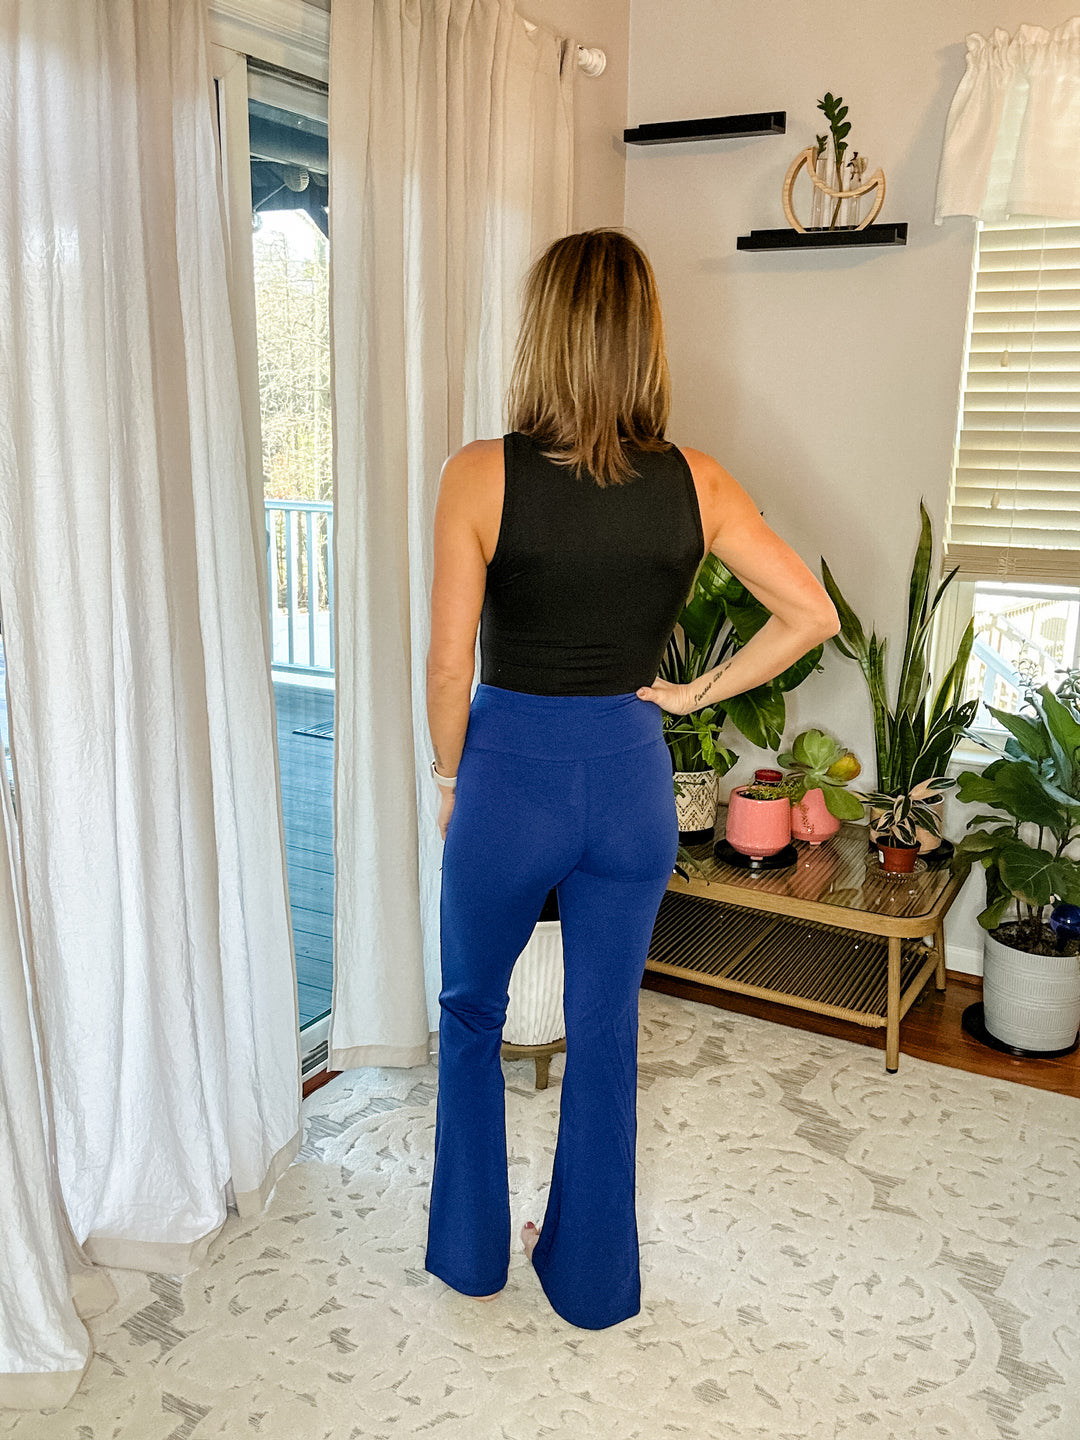 High Waist Yoga Flare Pants - The Teal Antler Boutique